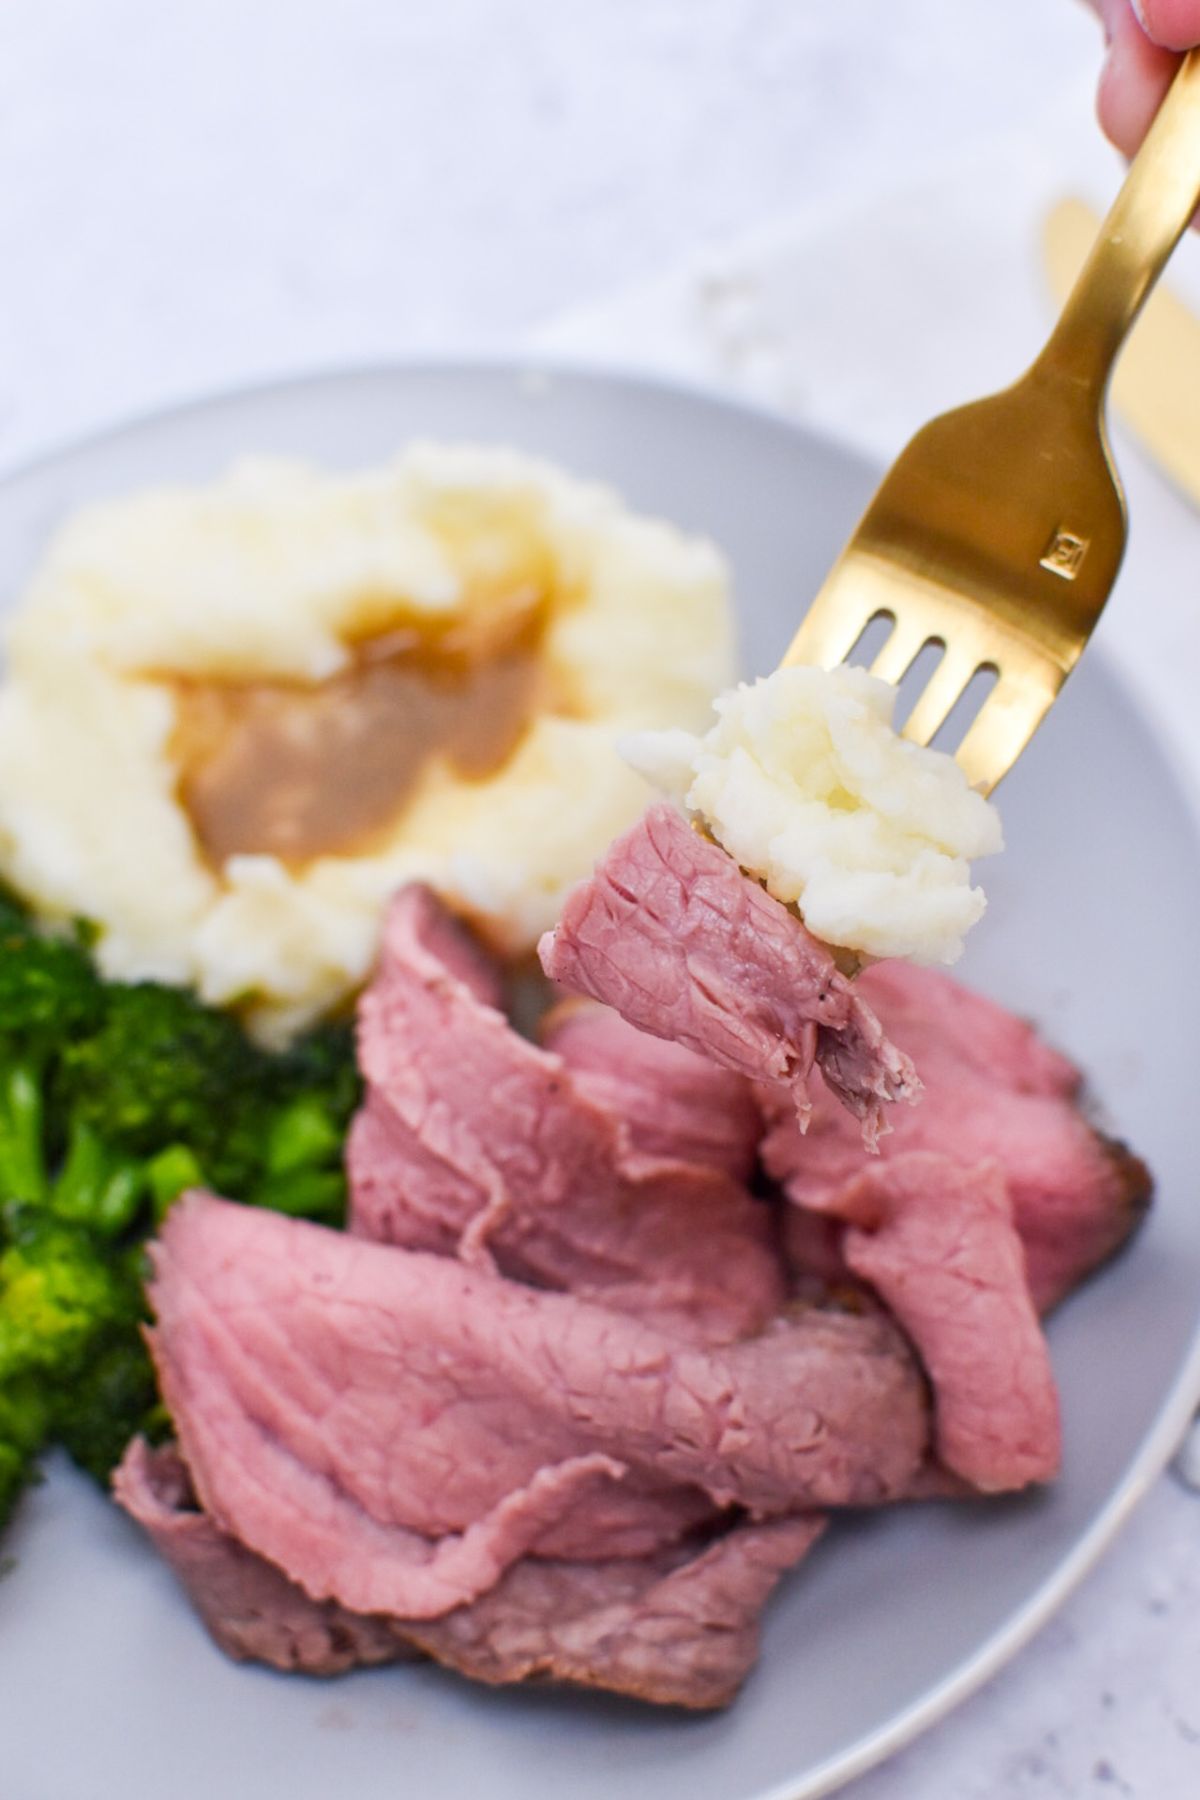 A gold fork with mashed potatoes and roast beef on it with a plate of food in the background.